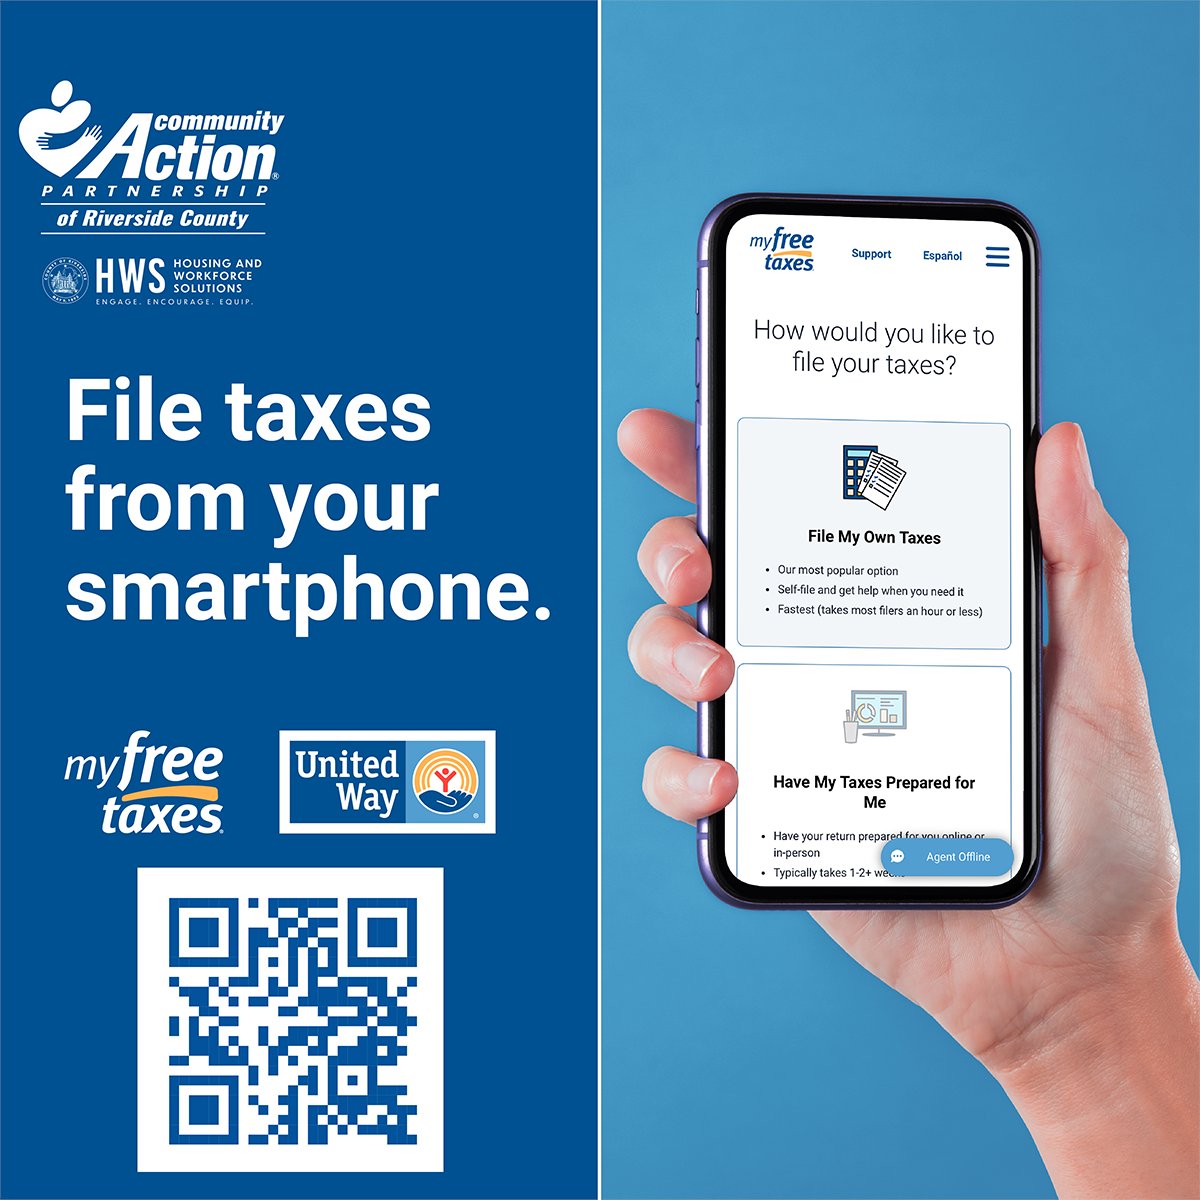 Did you know you can easily file your taxes using your smartphone, and it won't cost you a dime? Manage your tax preparation easily at hubs.ly/Q02sLQv00!
#CommunityAction #CAPRiverside #RivCoNOW #FreeTaxFiling #MyFreeTaxes